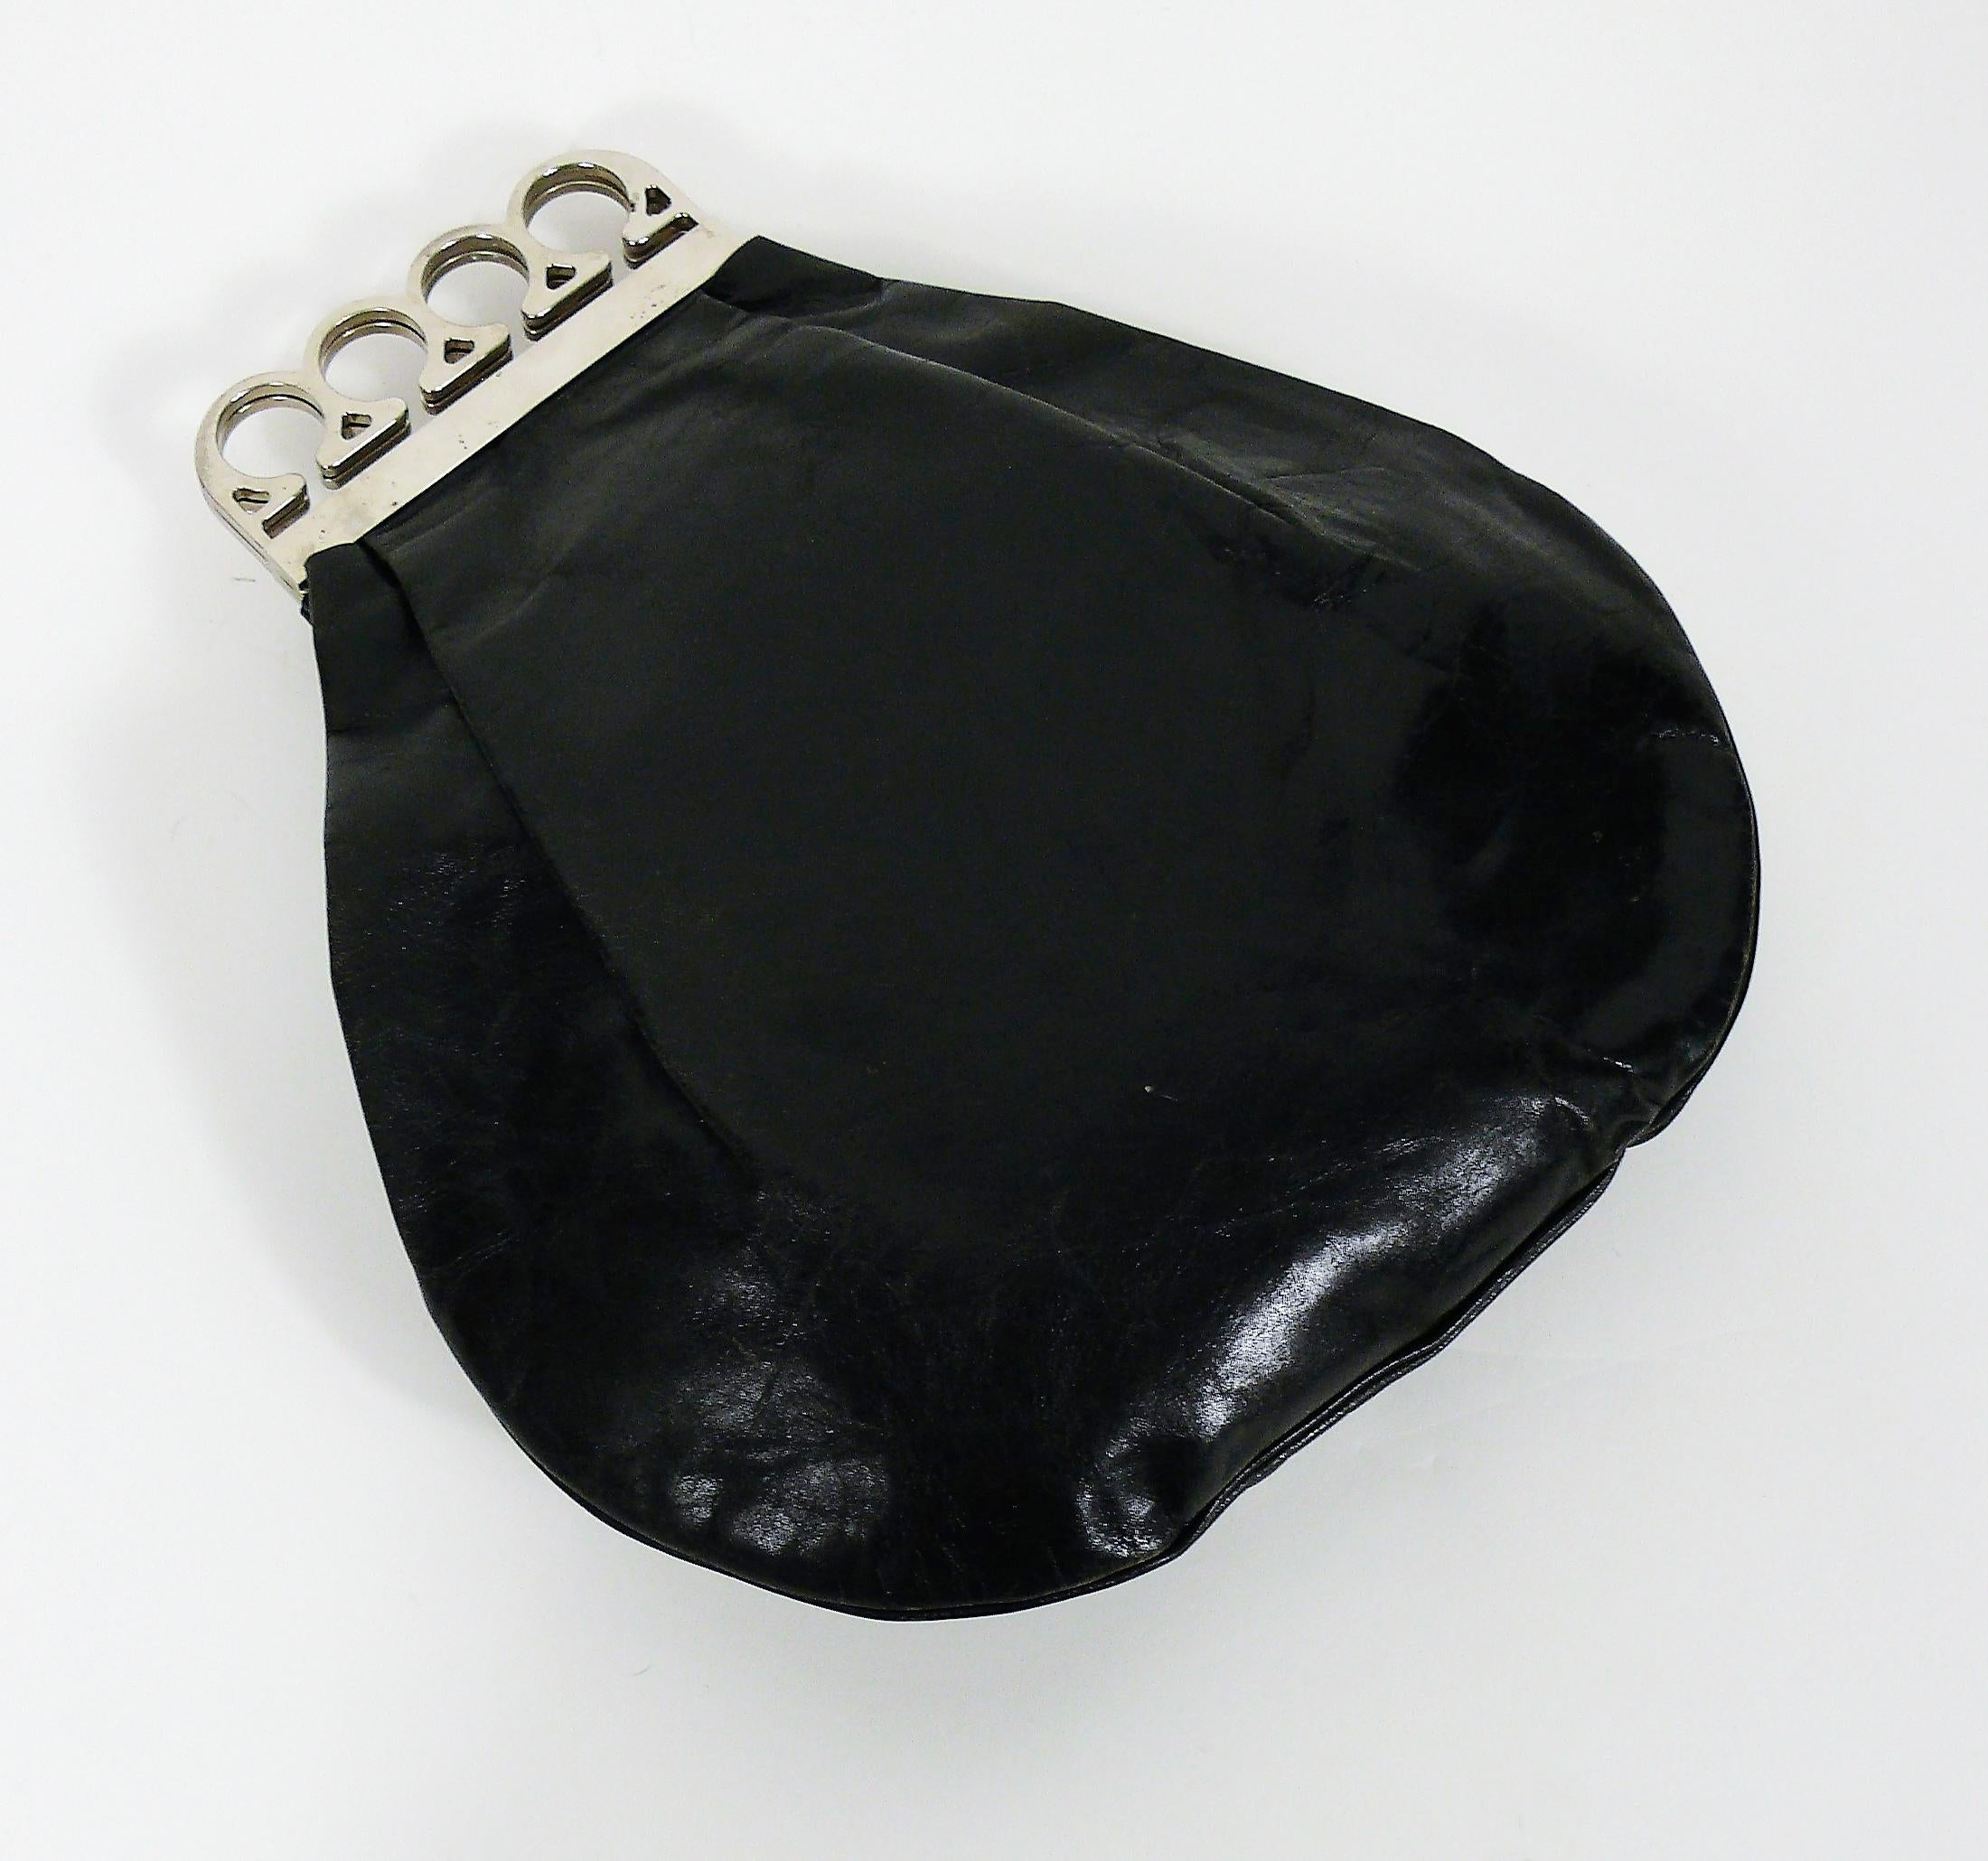 knuckle duster purse